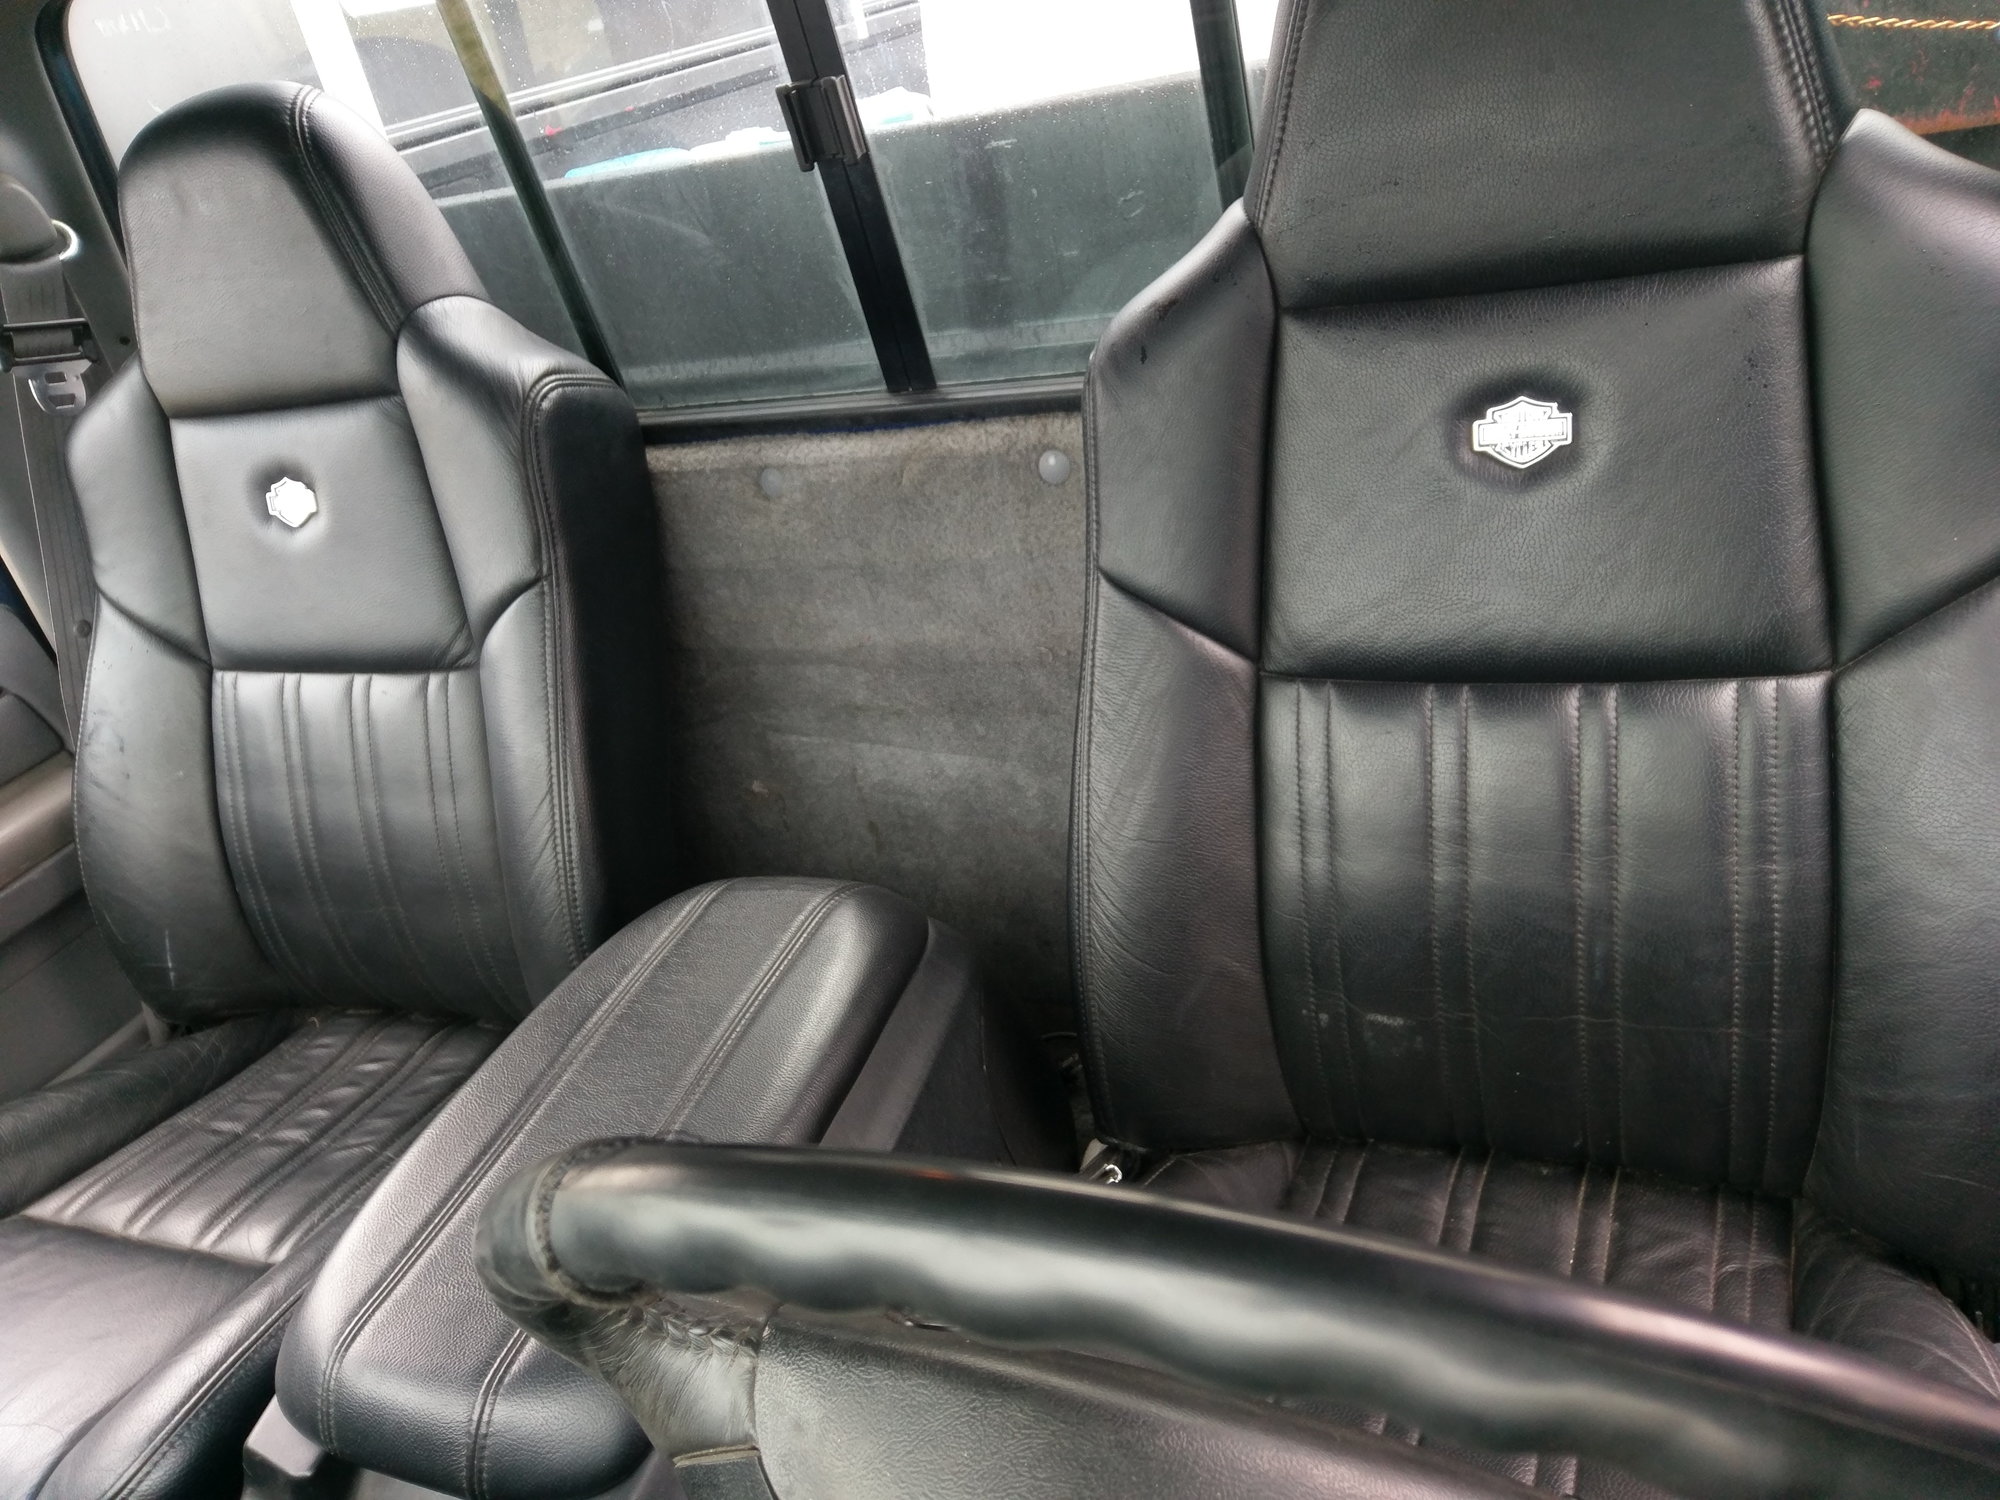 Super Duty Seats In Obs Truck Ford Truck Enthusiasts Forums